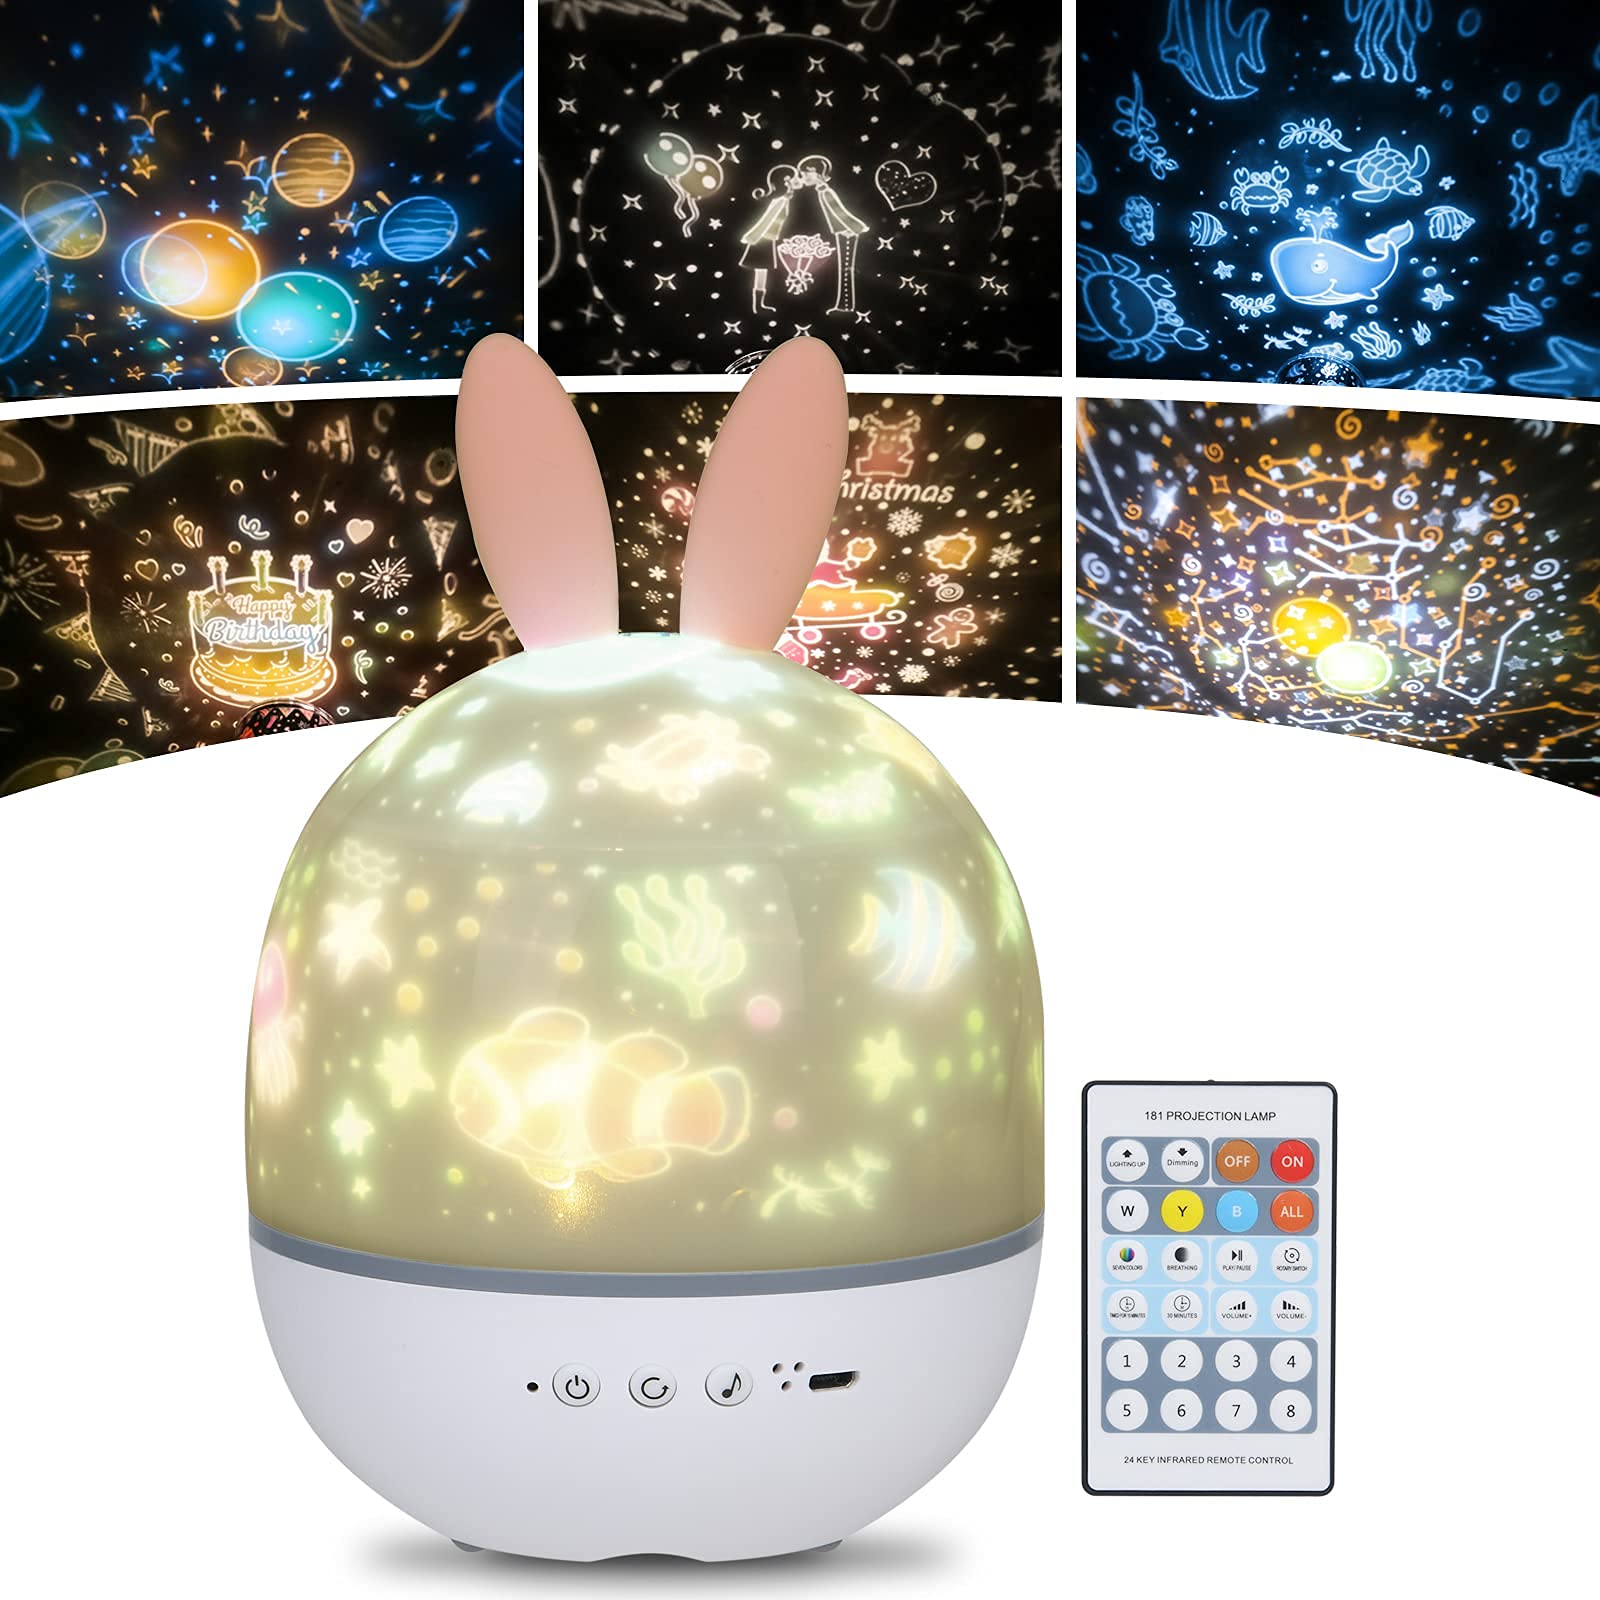 URAQT Star Light Projector with Music, Kids Night Light with Remote Control and Timer, Personalised Baby Kids Gifts, 4 Light Modes/6 Projection Themes/7 Brightness/8 Kinds of Music/360° Rotation